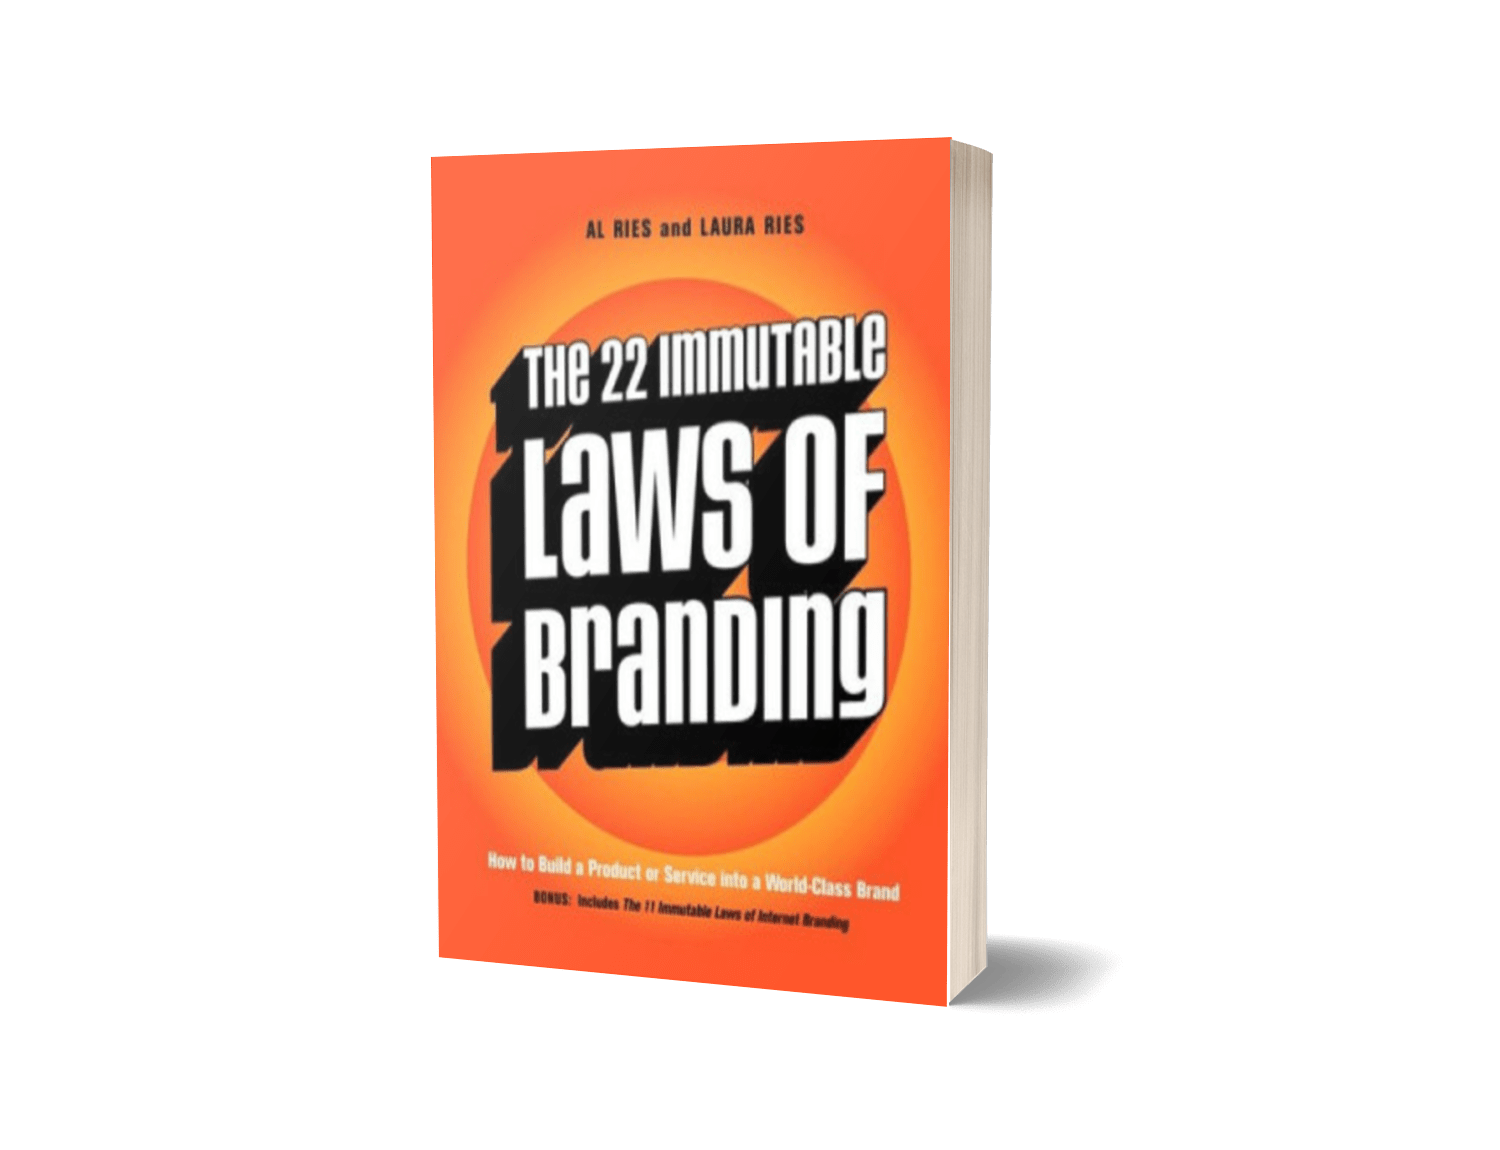 The 22 Immutable Laws of Branding by Al Ries and Laura Ries